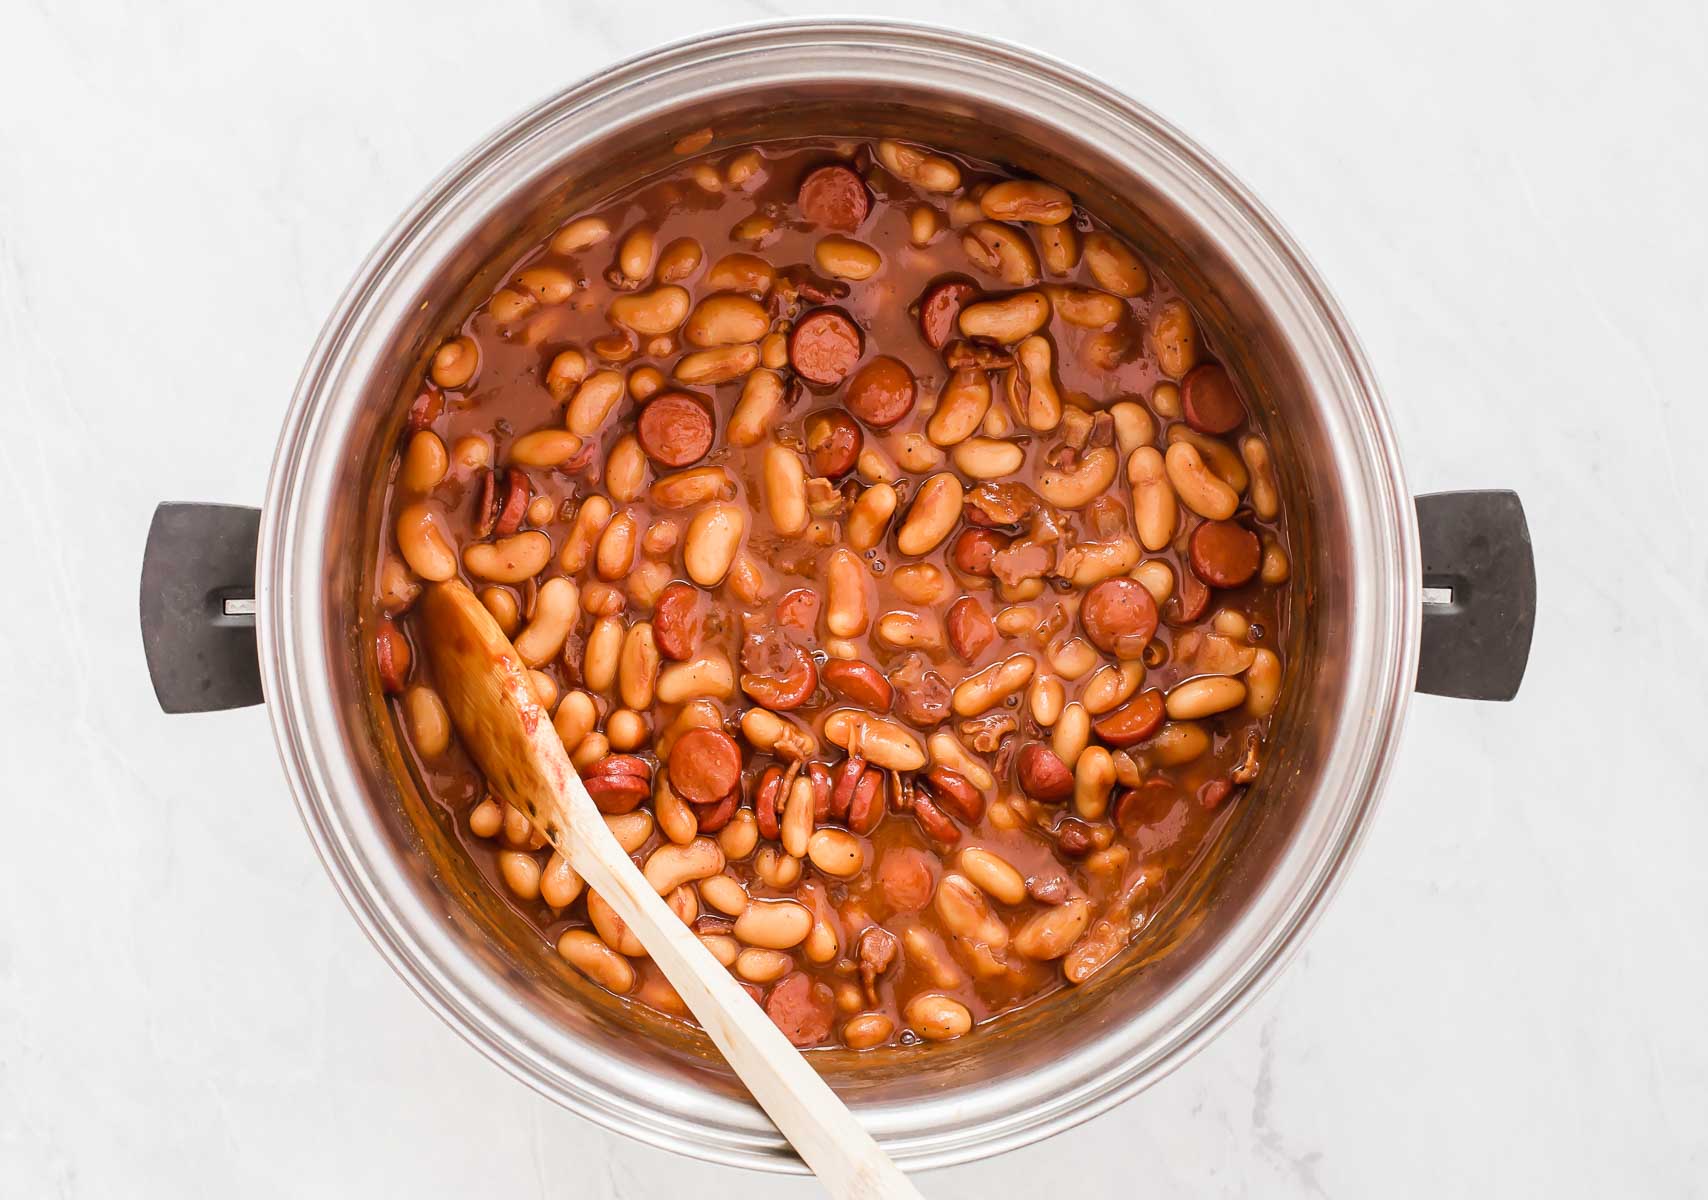 Cooked pork and beans in a pot with wooden spoon.